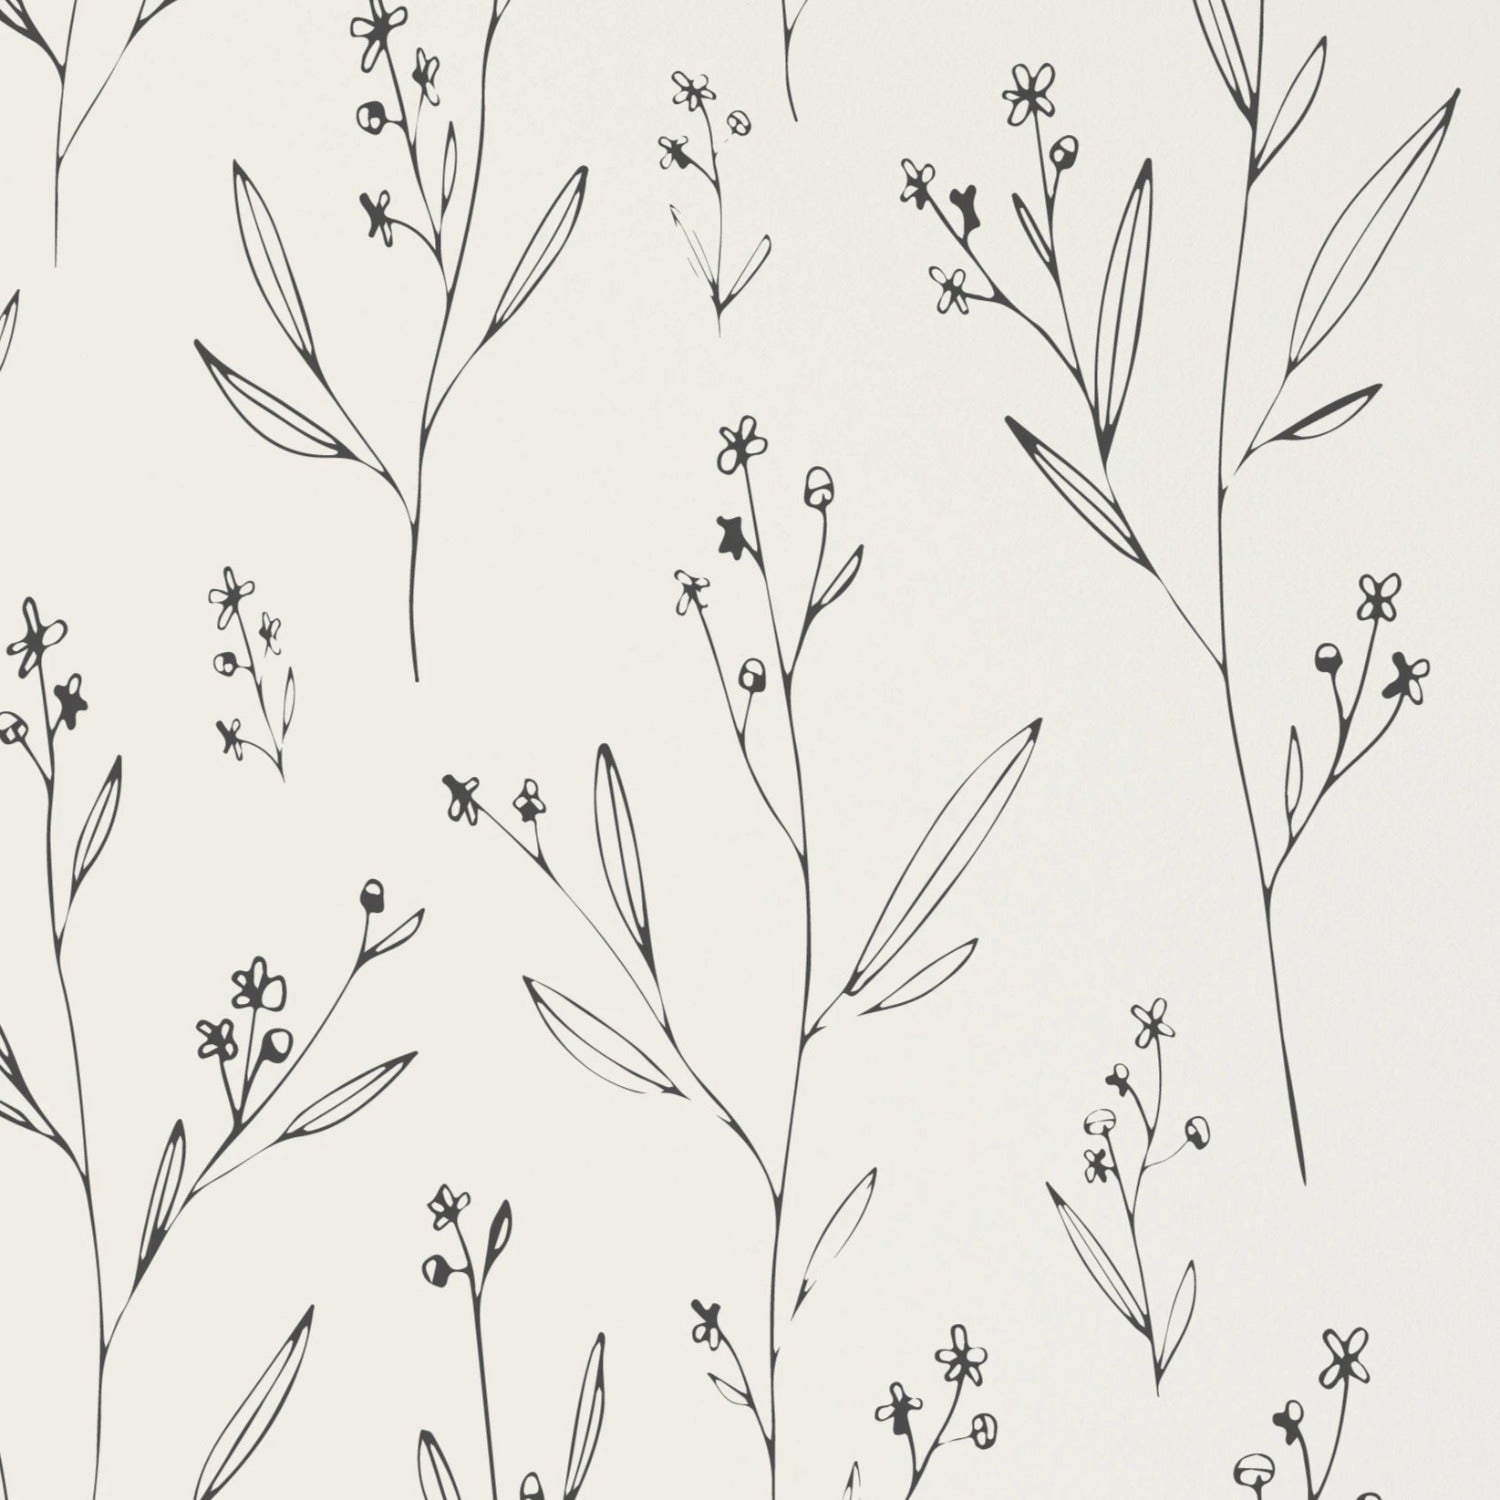 Close-up of the Dainty Minimal Floral Wallpaper featuring a black and white sketch-like design with slender branches and tiny flowers on a clean white background, offering a modern and simplistic aesthetic.